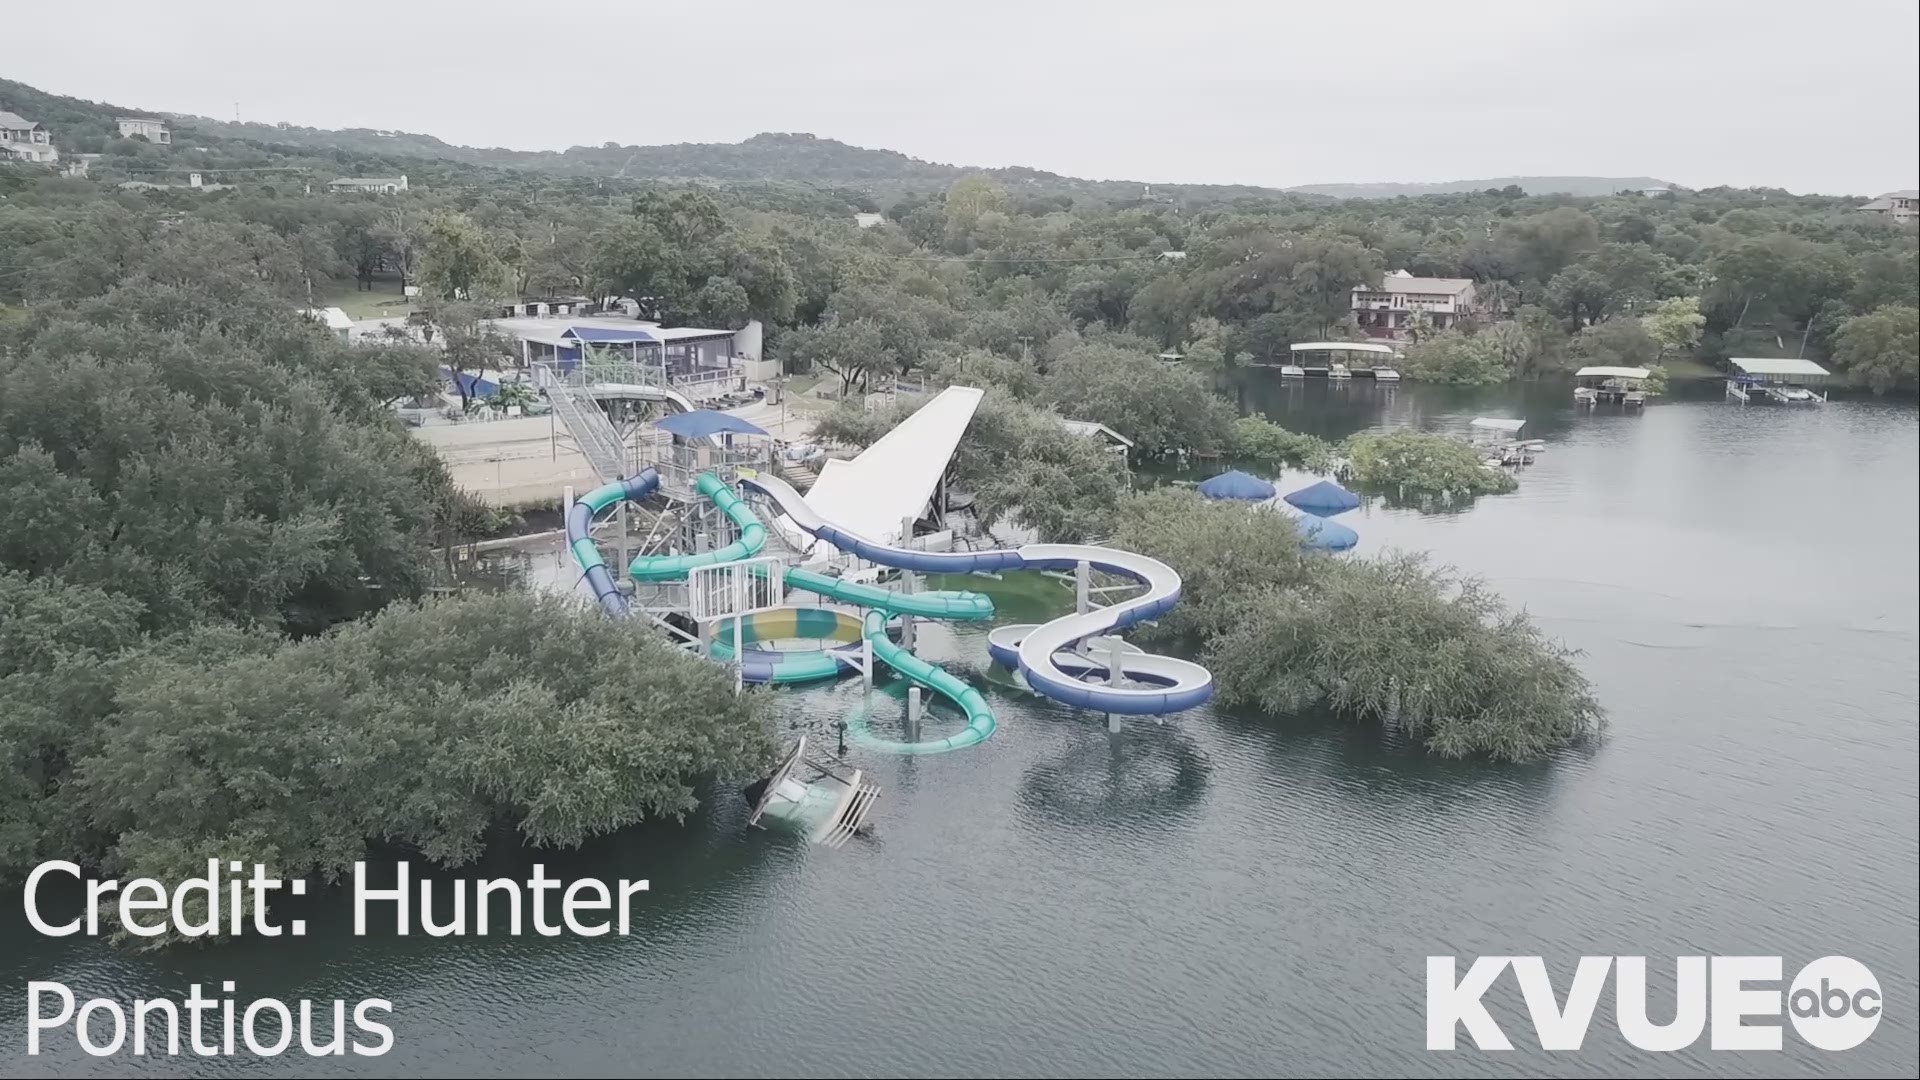 KVUE has covered the effect rising Lake Travis waters has had on surrounding homeowners. Now we're getting a look at how the floodwaters have affected businesses along Lake Travis. Video: Hunter Pontious